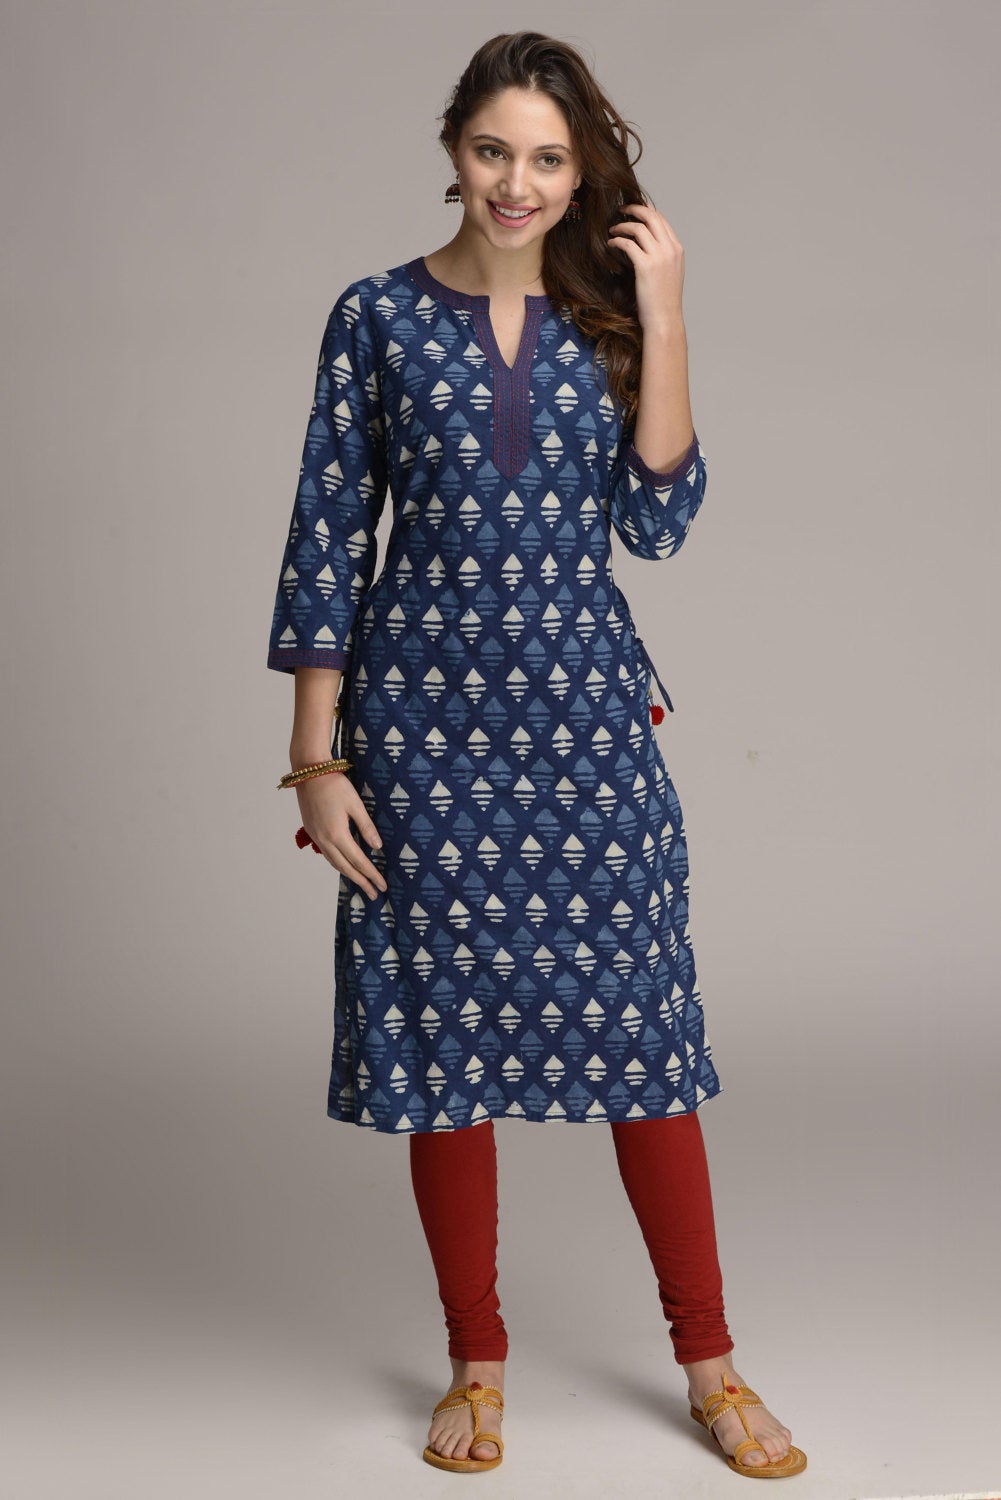 Indigo Hand block printed ethnic long Indian kurta with side tassels and hand embroidery on neck